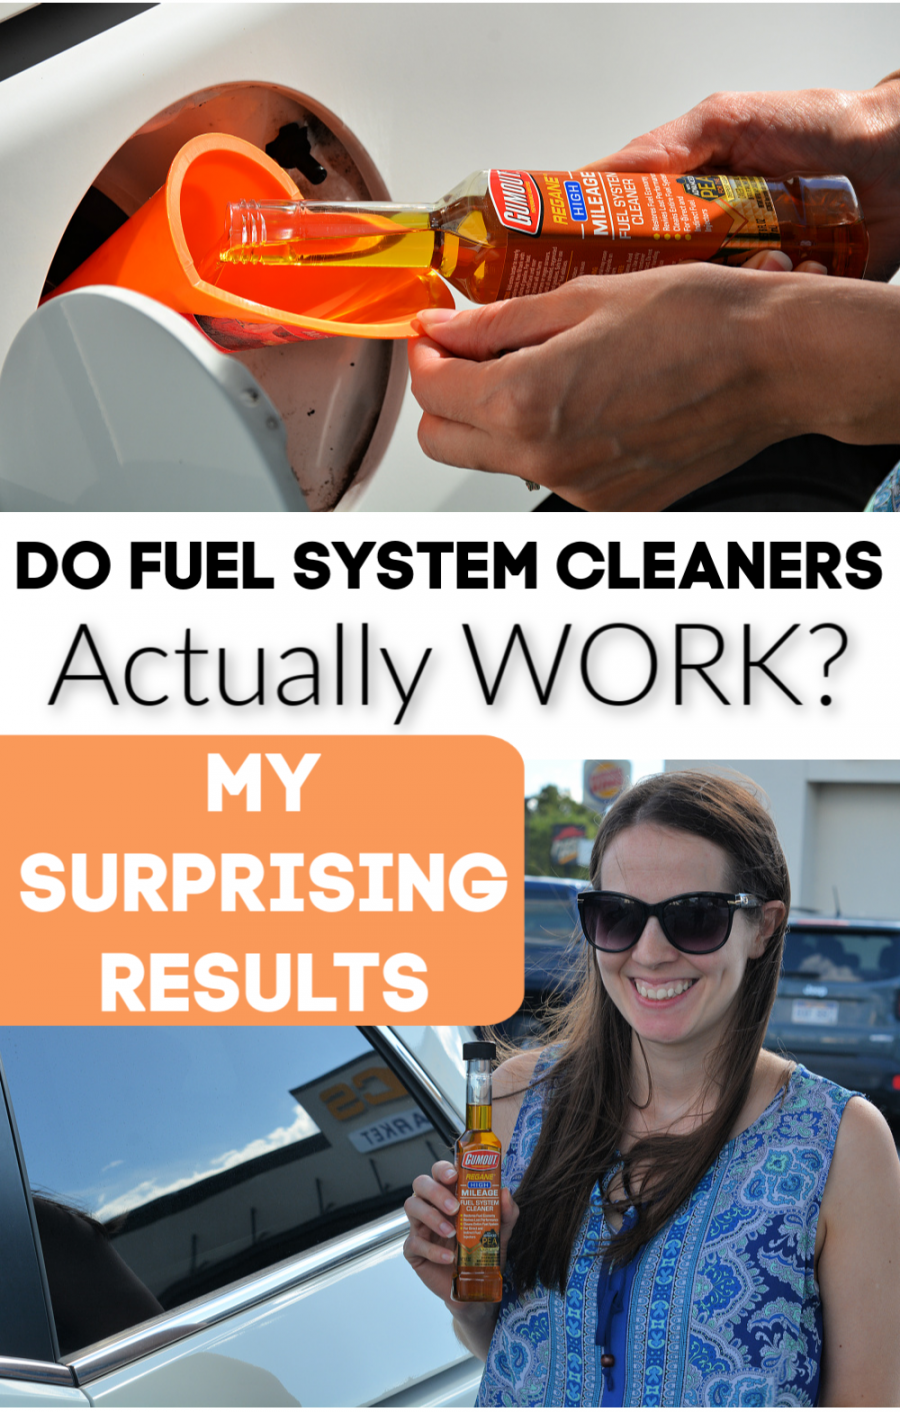 Do Fuel System Cleaners Actually Work?